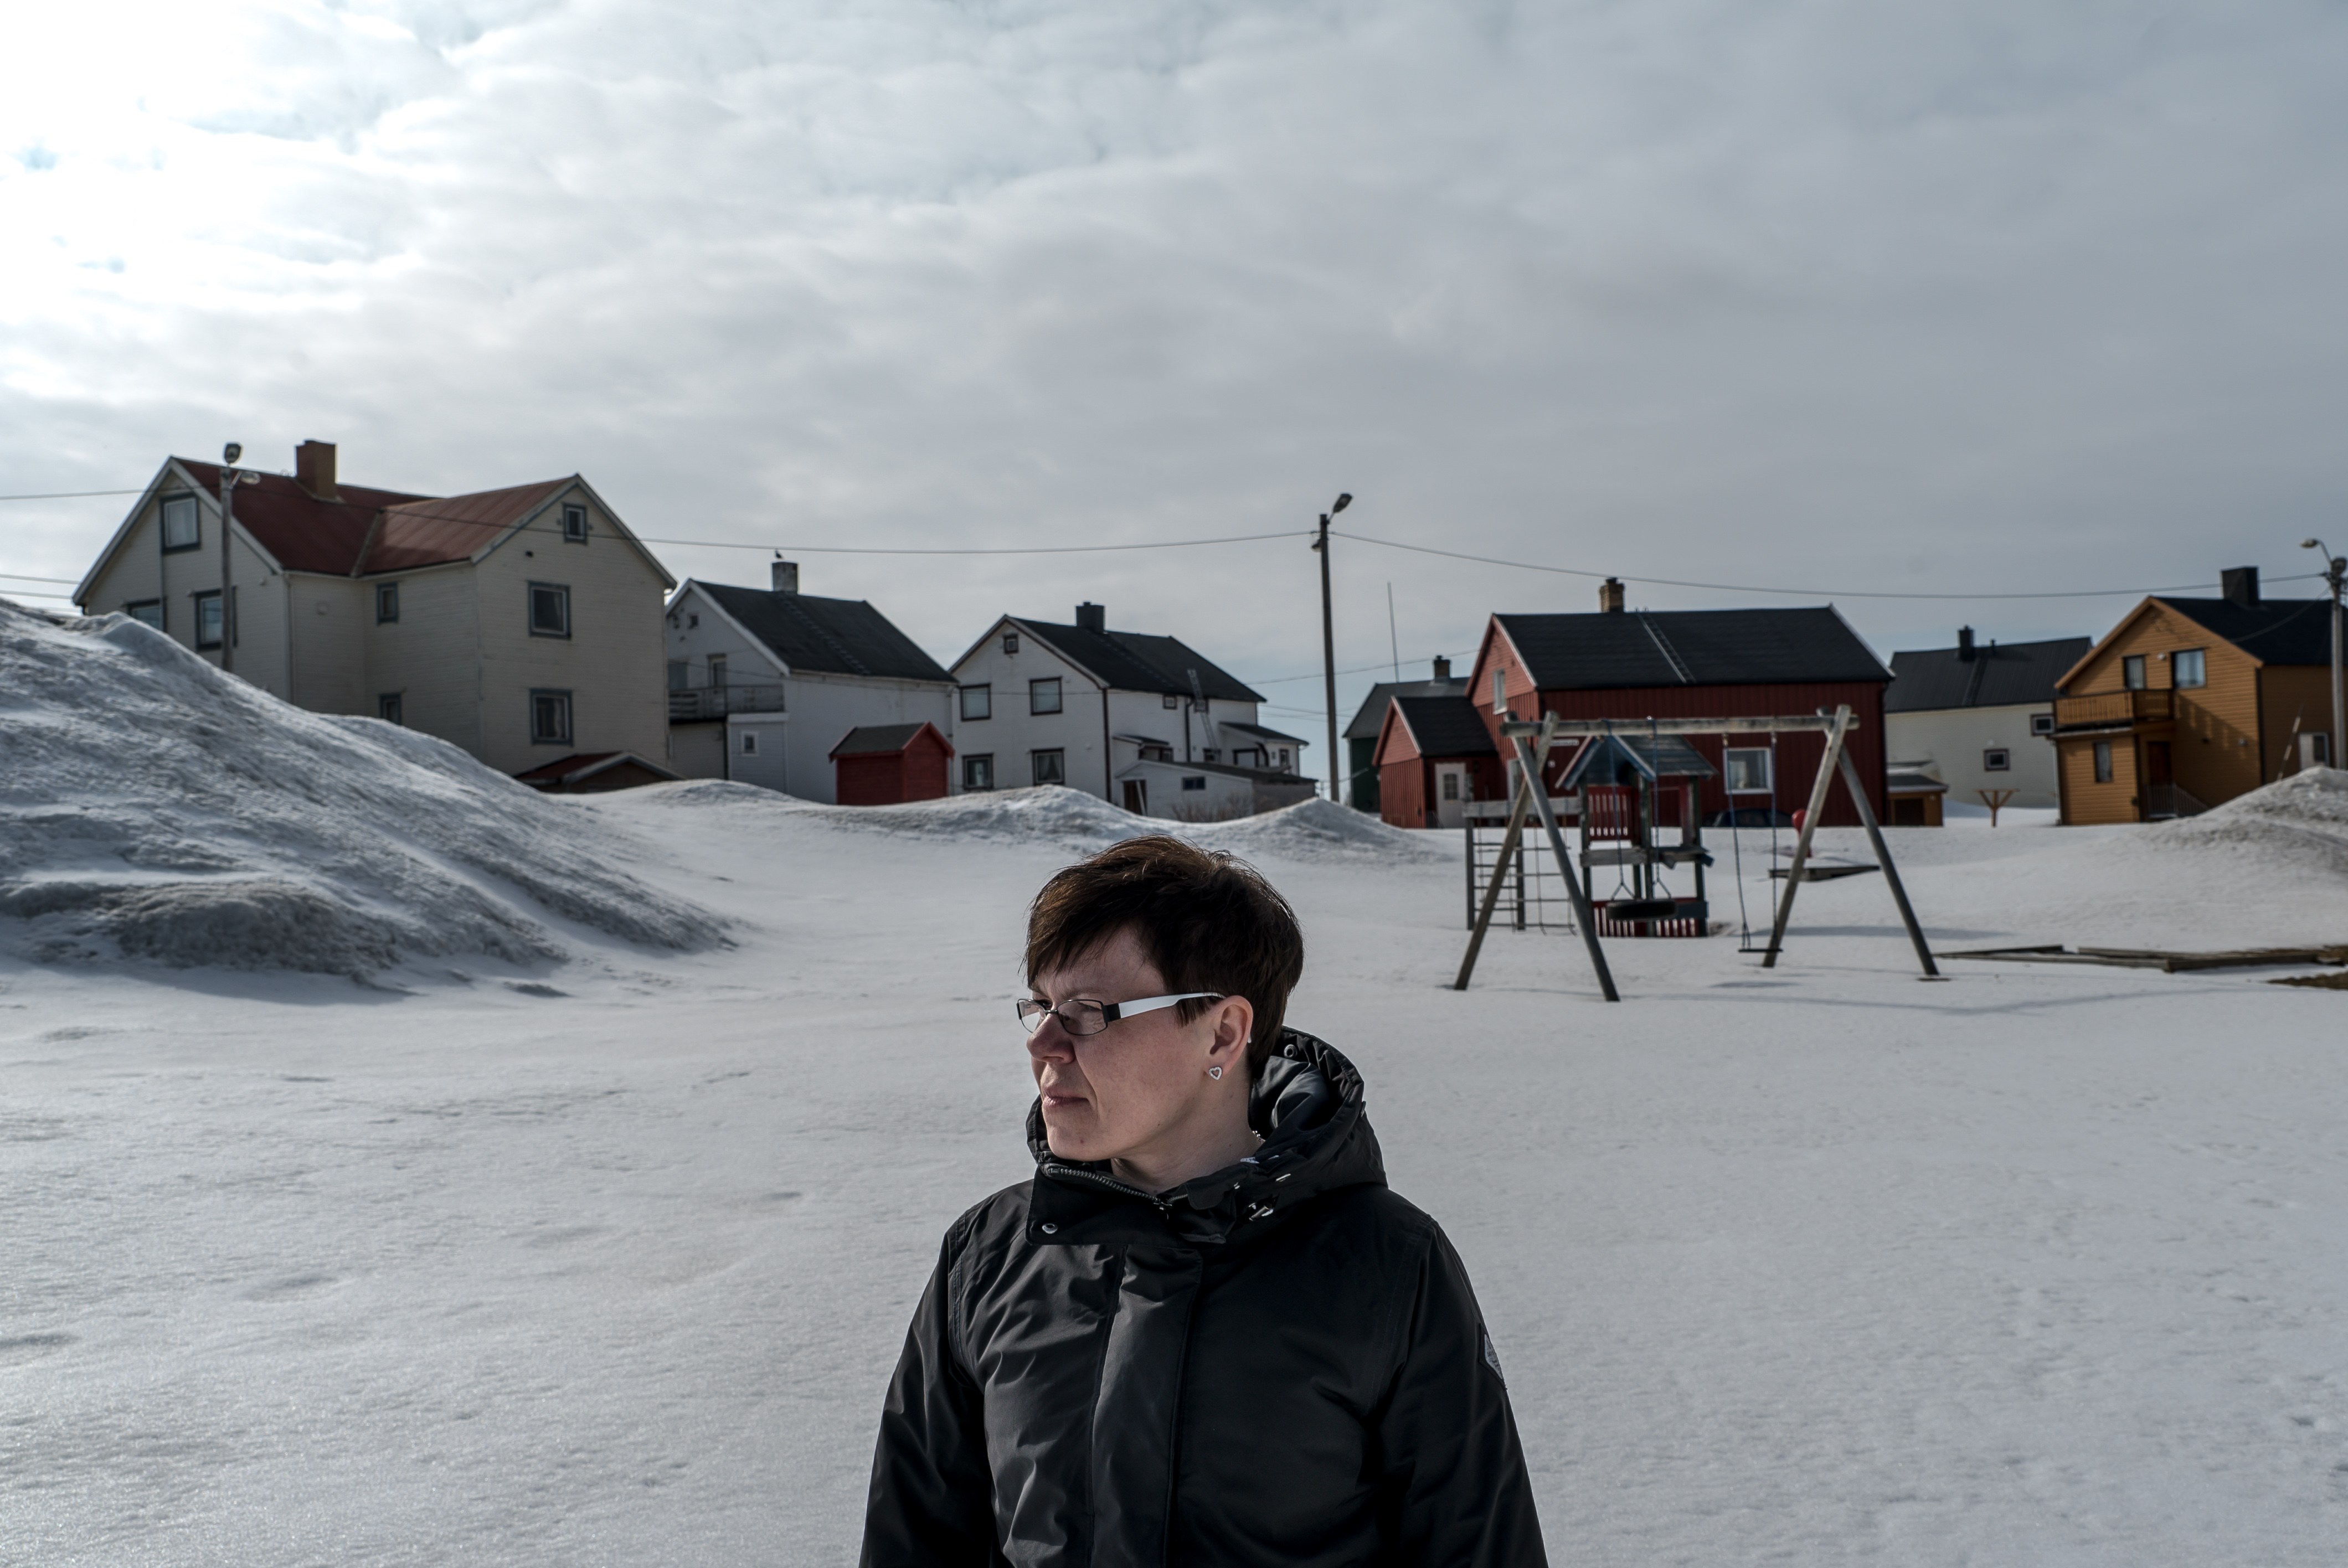 May-Sissel Dorme in Vardo, an island town in Norway's remote northeast which is sustained in part by a secretive American-Norwegian radar facility, May 13, 2017. Many residents suspect the radars are a source of mysterious ailments, but are certain about a more existential threat. "If war breaks out we will be the first place the Russians bomb," Dorme said. (Andrew Testa/The New York Times)